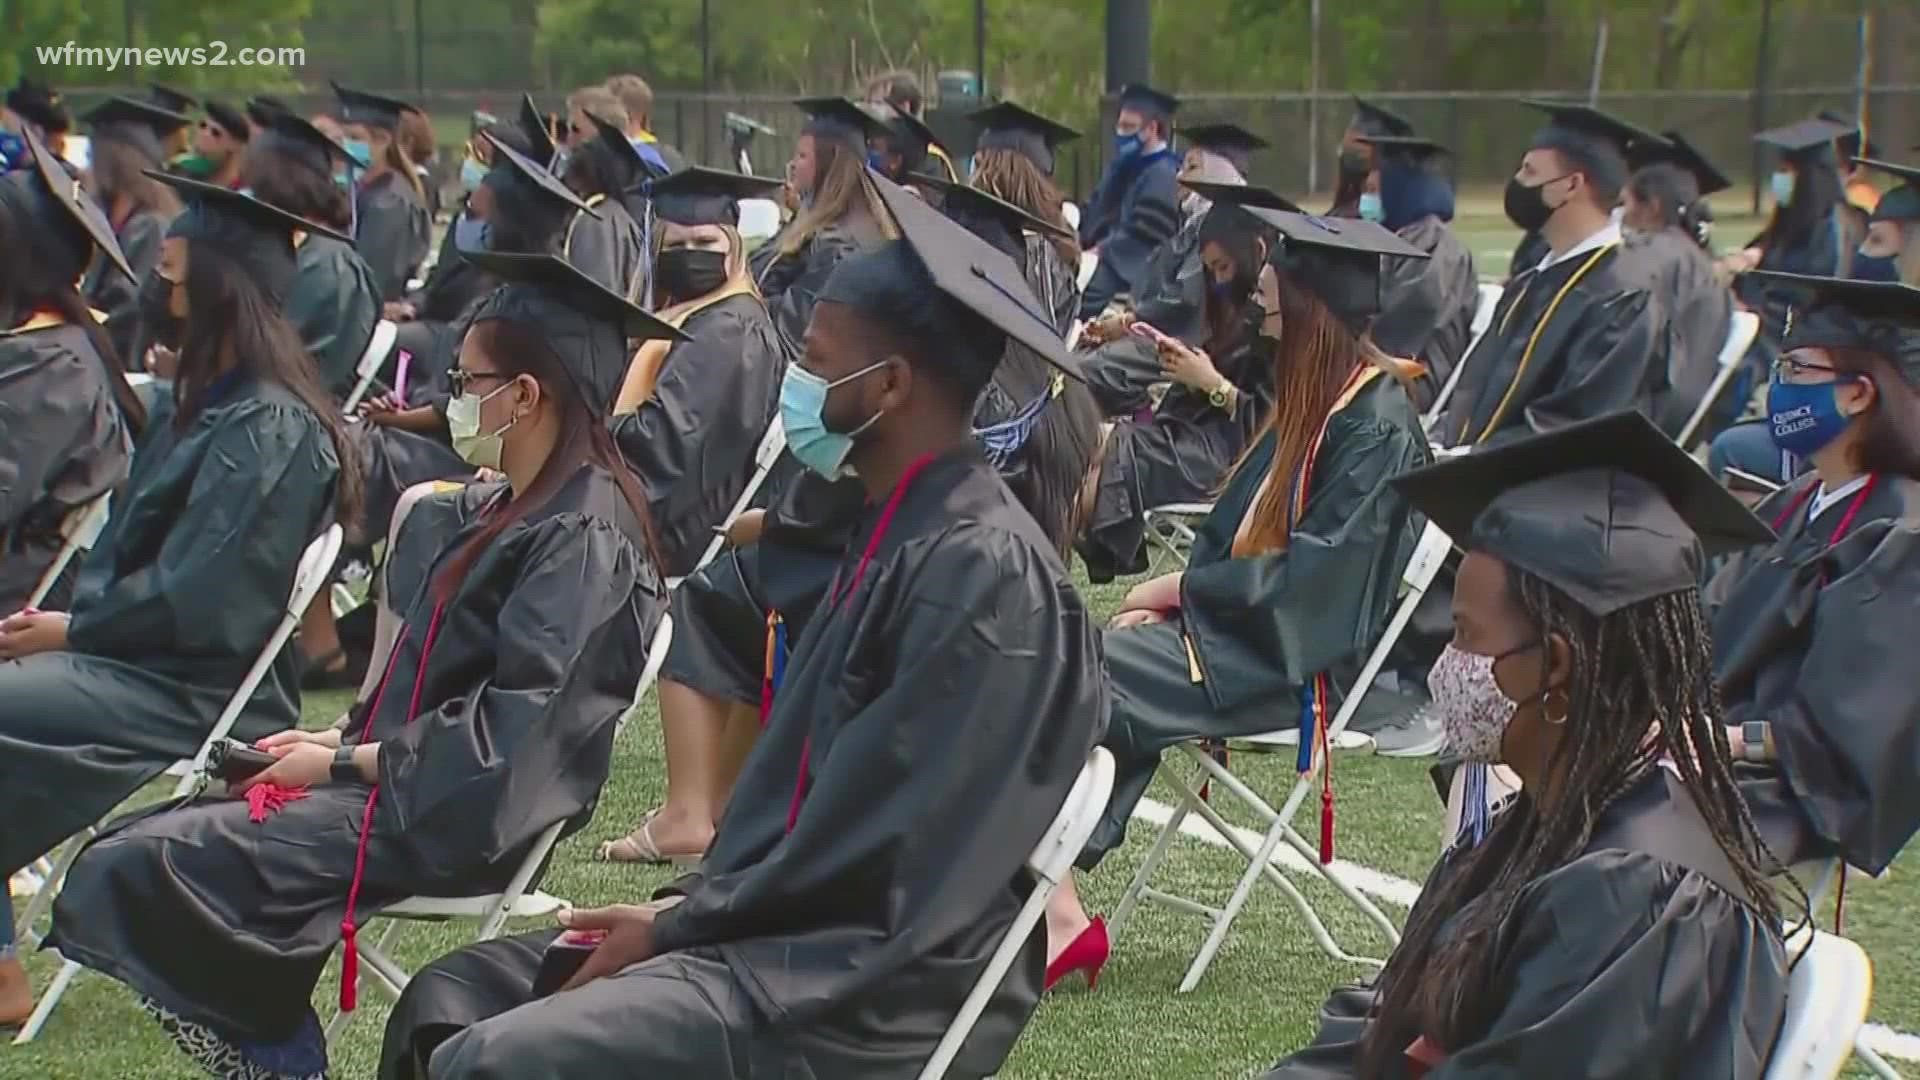 The U.S. Dept. of Education said they’ll move to cancel student debt for 40,000 Americans.